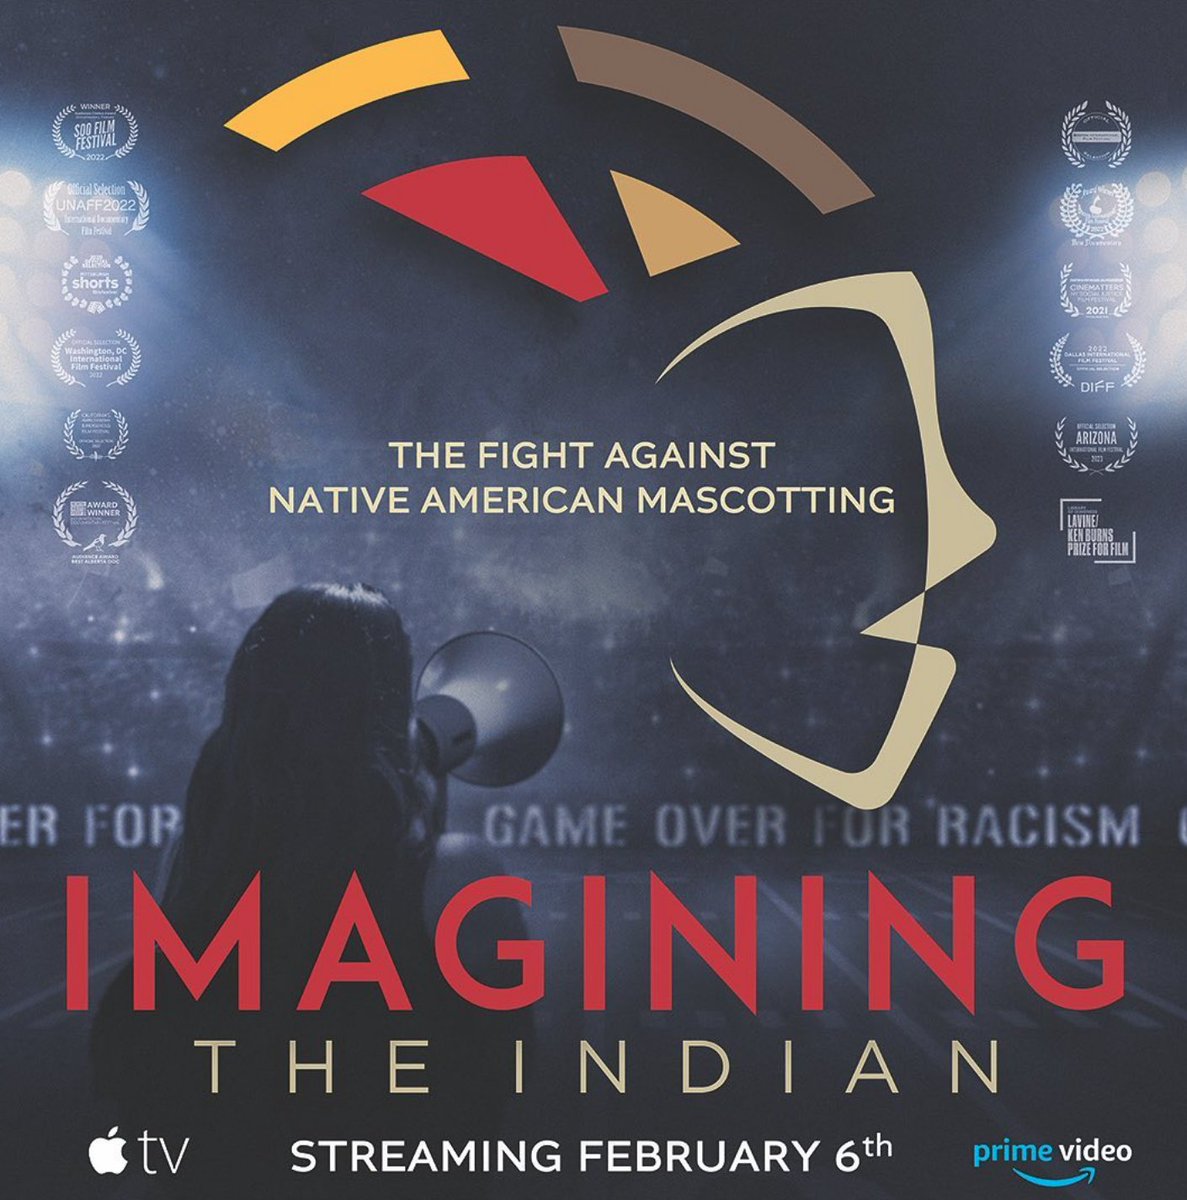 There should be no Native mascots used in American sports. Period. And if you watch @ImaginingIndian, you’ll see that the problem is a lot bigger than the Big Game. #SBLVIII imaginingtheindianfilm.org